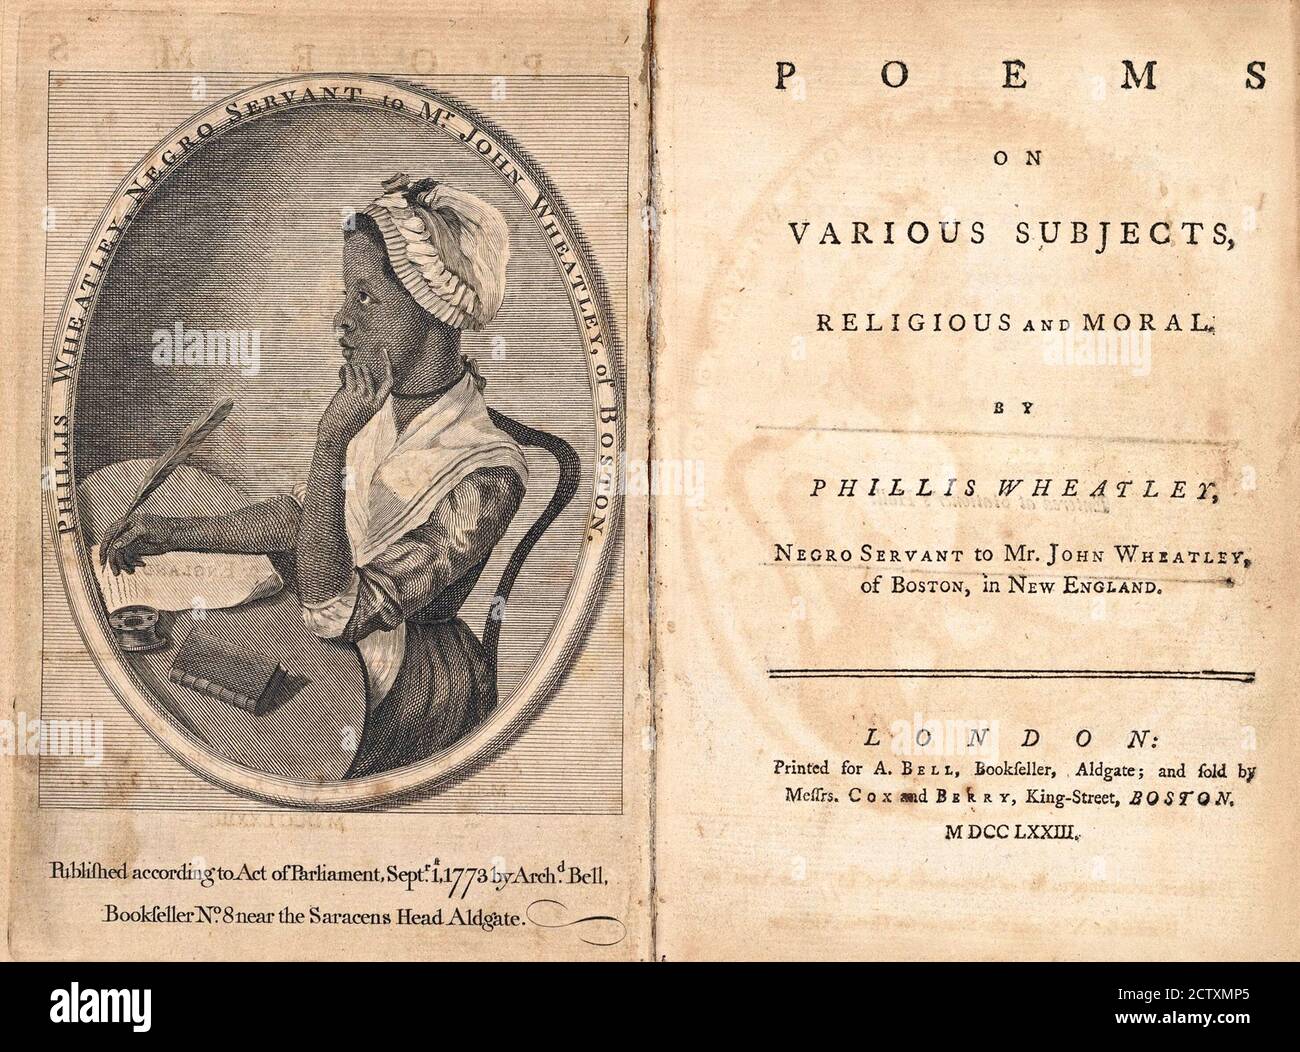 Phillis Wheatley (c.1753-1784), the first African-American author of a published book of poetry. Frontispiece and title page of a first edition of her book 'Poems on Various Subjects Religious and Moral', 1773 Stock Photo